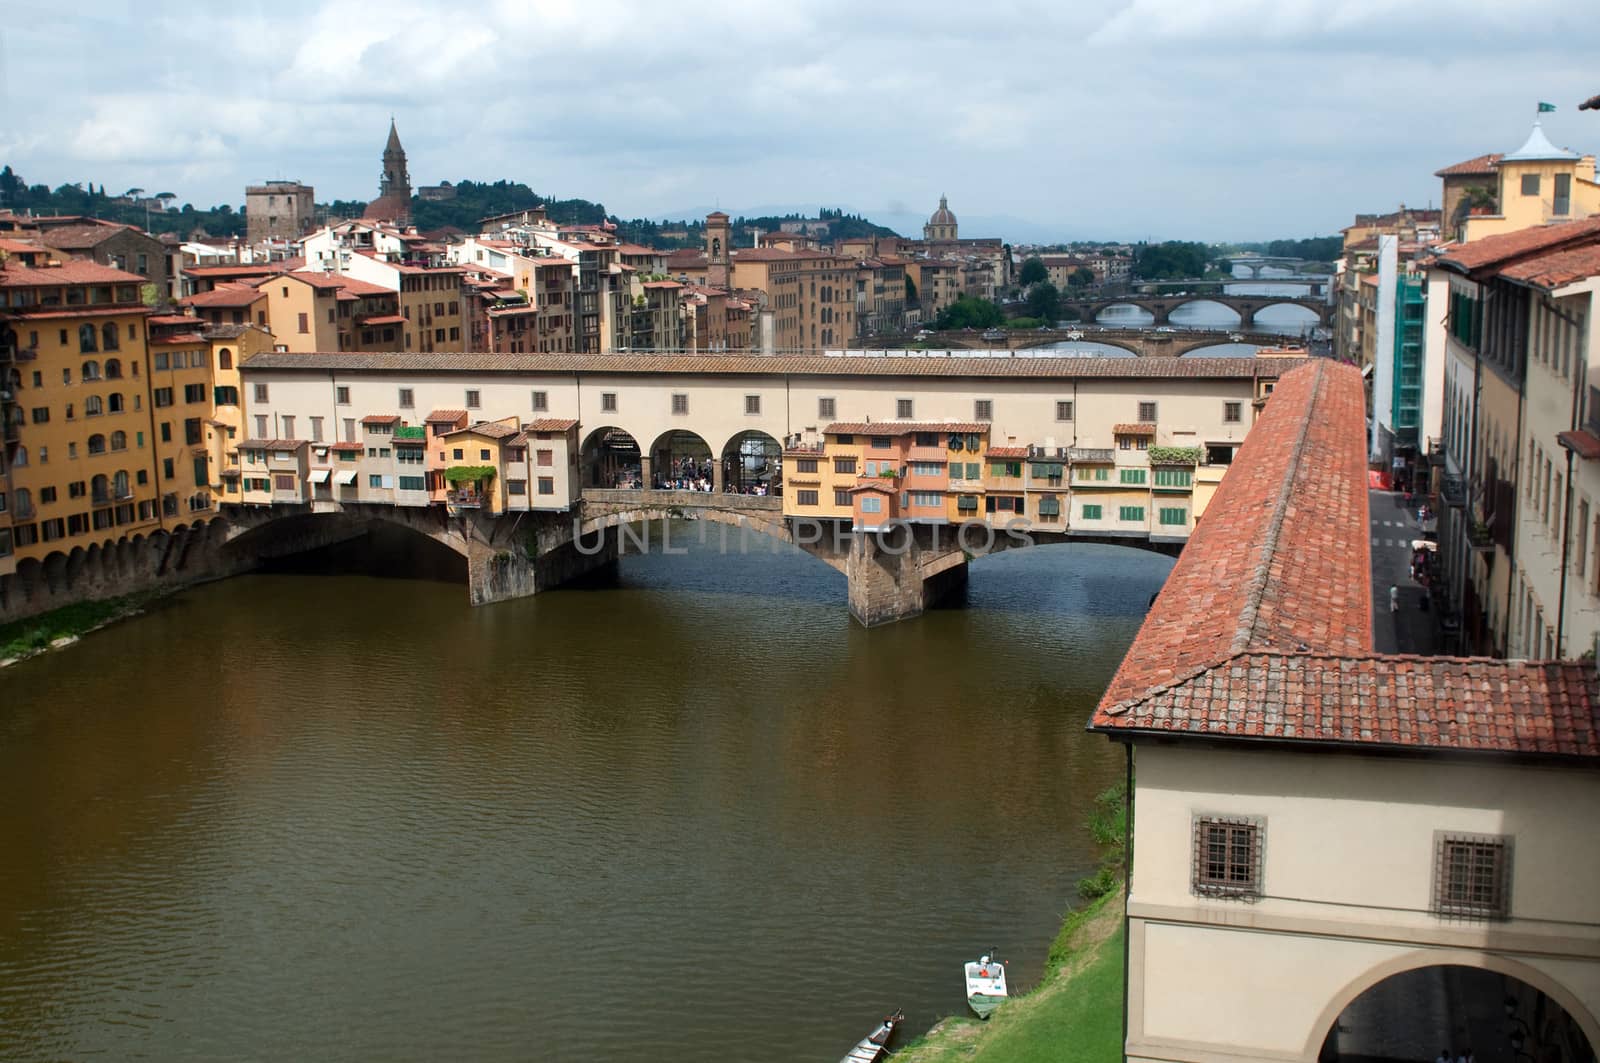 The Ponte Vecchio ("Old Bridge") is a Medieval bridge over the Arno River in Florence, Tuscany, Italy. by lexan